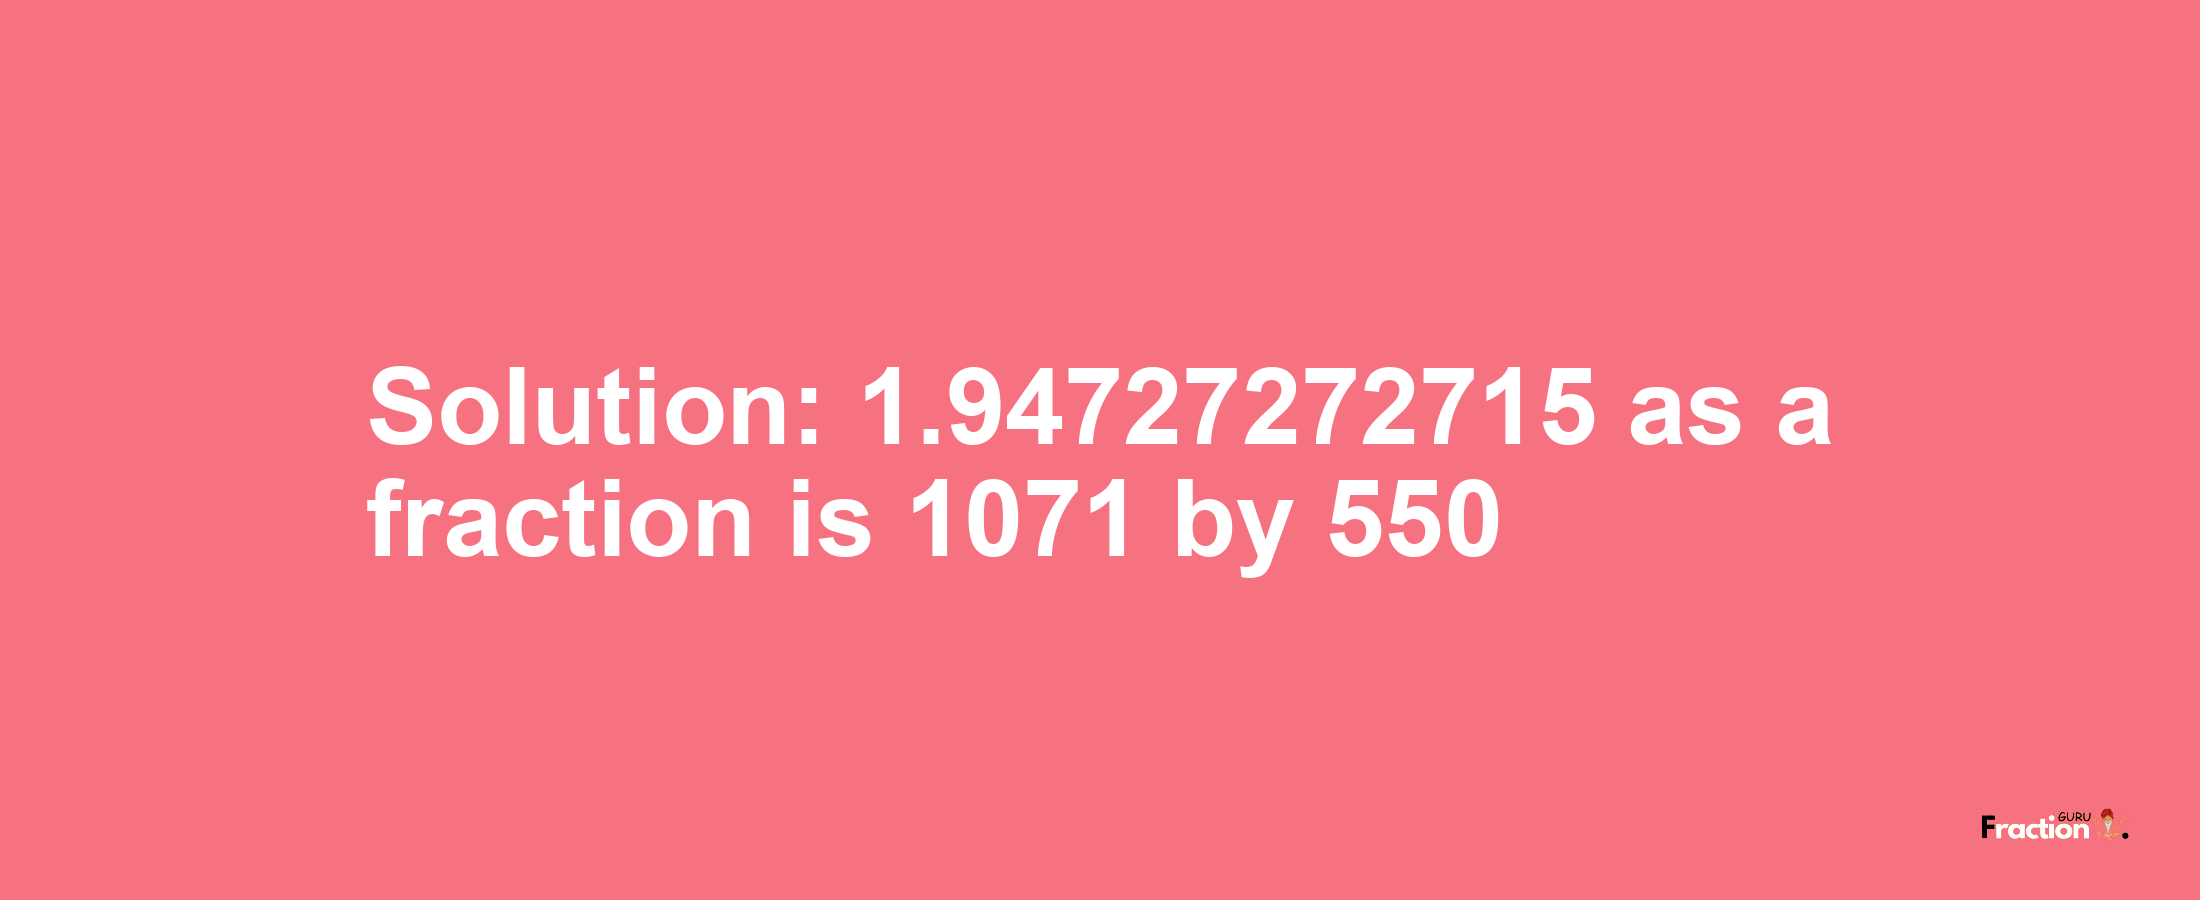 Solution:1.94727272715 as a fraction is 1071/550